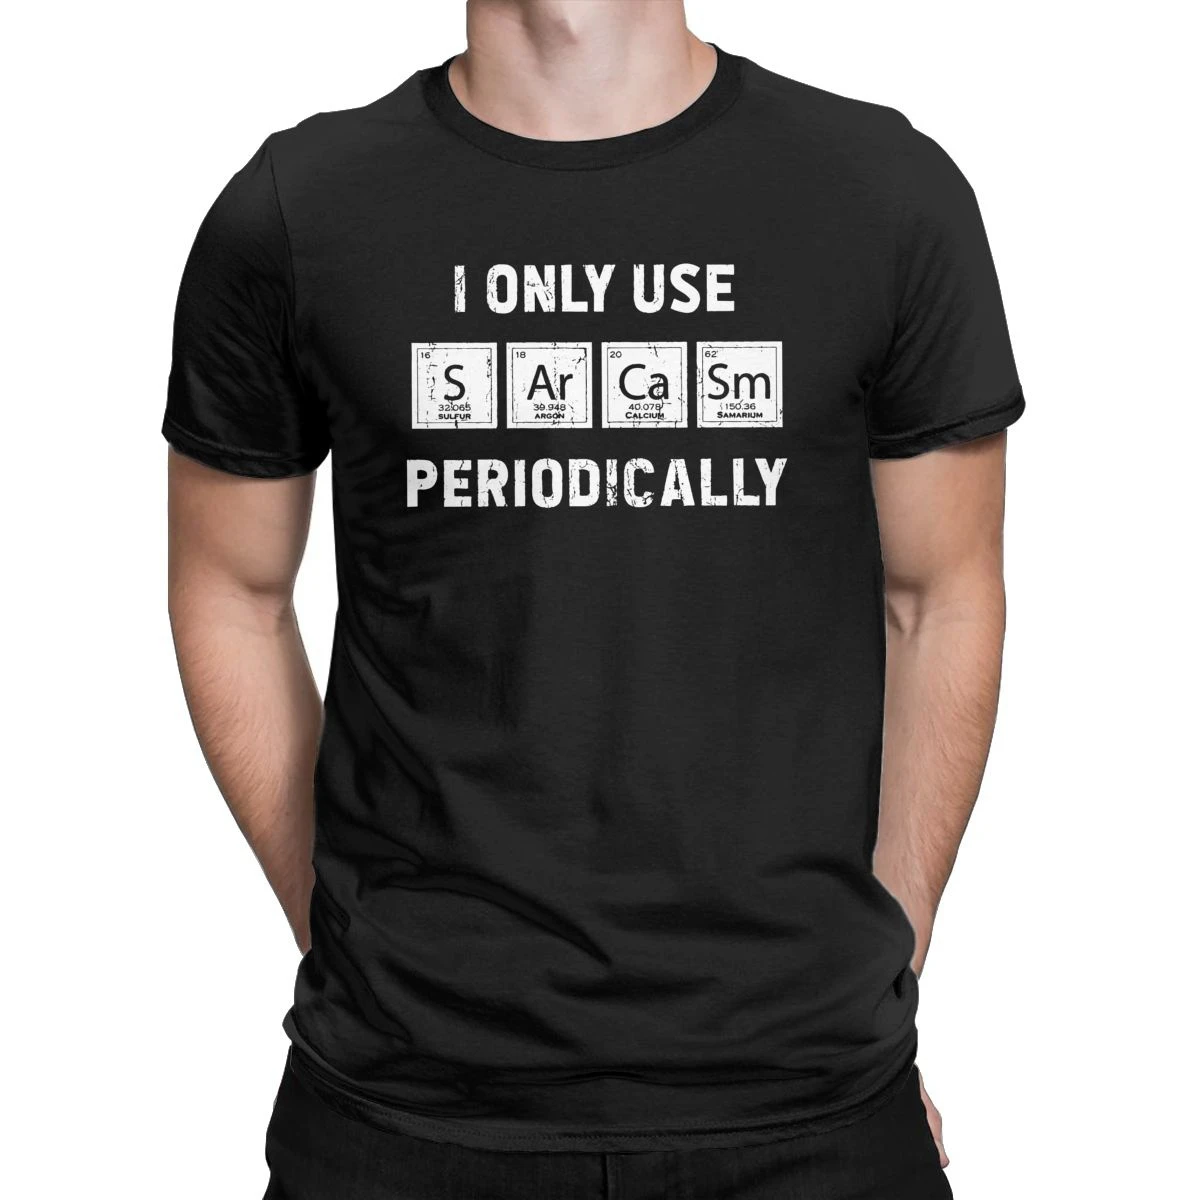 

Men's T-Shirts Sarcasm Primary Elements I Only Use Periodically Chemistry Unique 100% Cotton Tees Periodic Table T Shirt Clothes